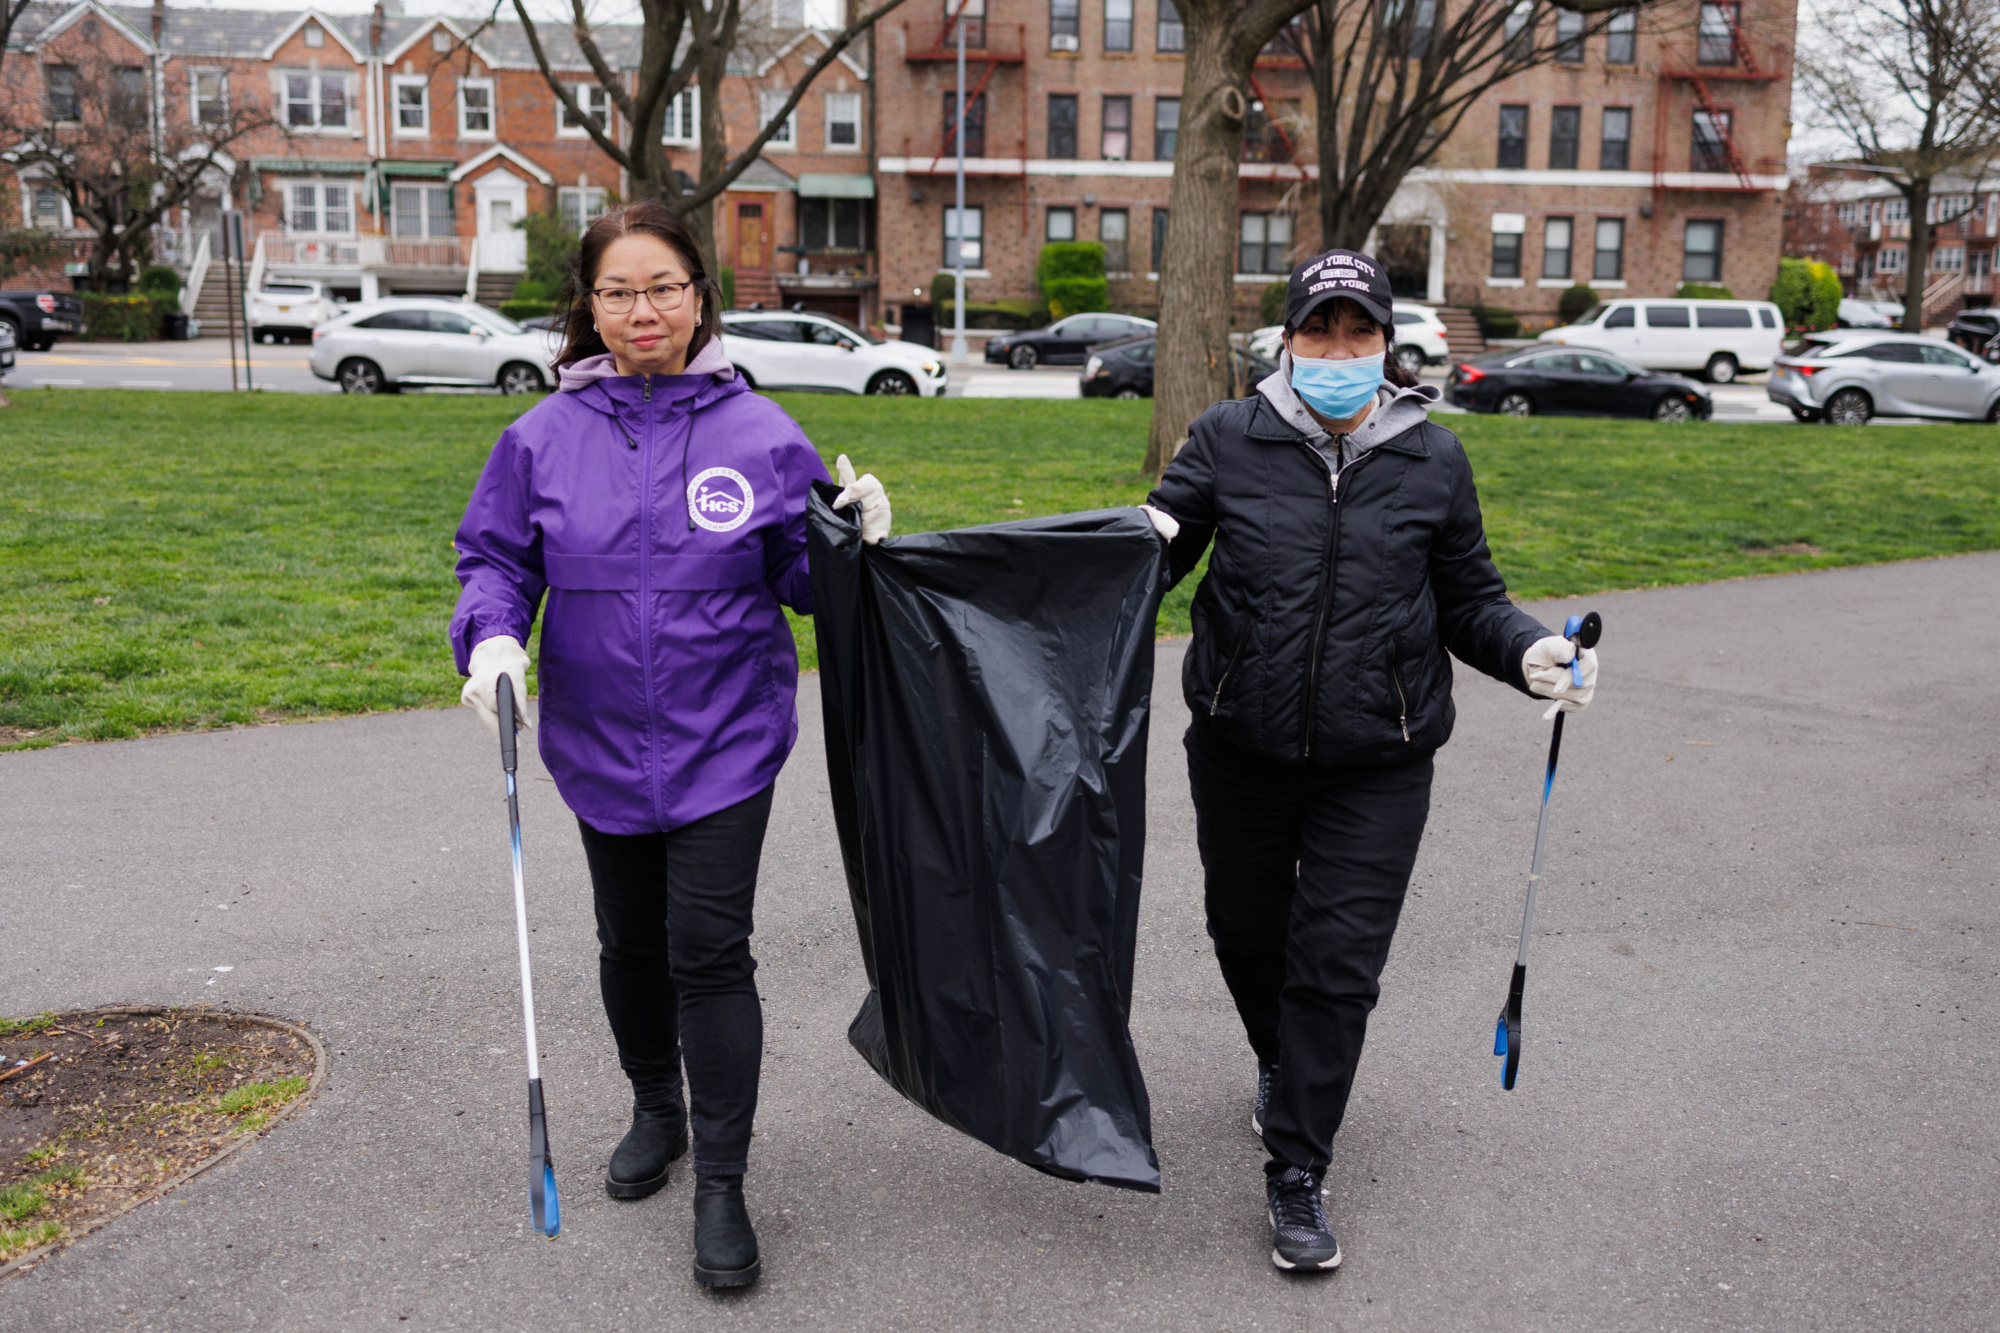 Two people wearing masks and gloves hold trash bags and litter-picking tools in a park, with cars and houses in the background.